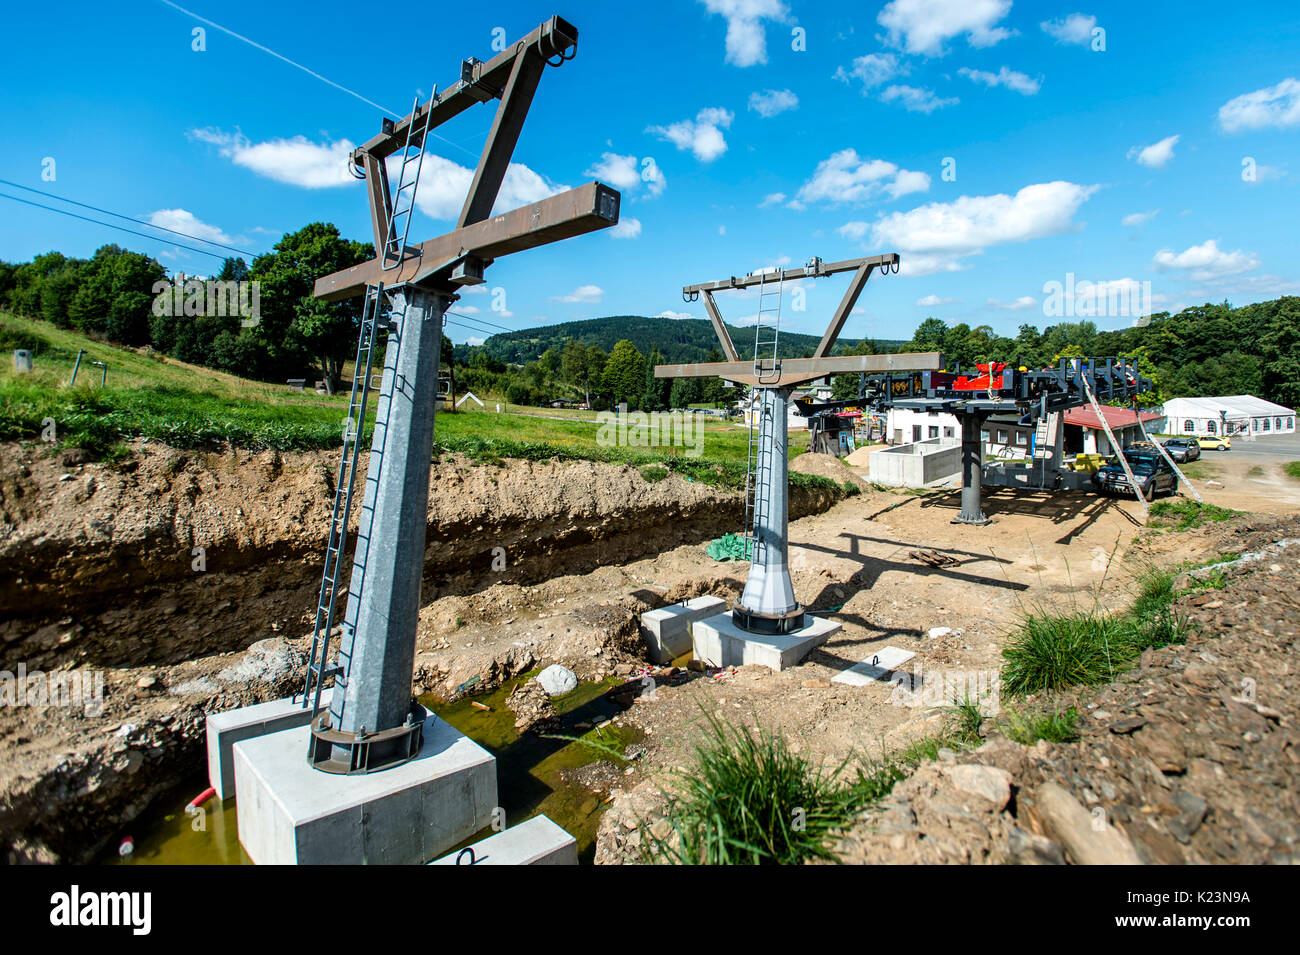 Ski center Destne v Orlickych horach is building the four-seat chairlift, for about 30 million crowns, in Destne v Orlickych horach, Czech Republic, on August 29, 2017. The upcoming winter season should increase a comfort of skiing in the Marta II area. The 865-meter chairlift can transported 2180 people per hour. (CTK Photo/David Tanecek) Stock Photo